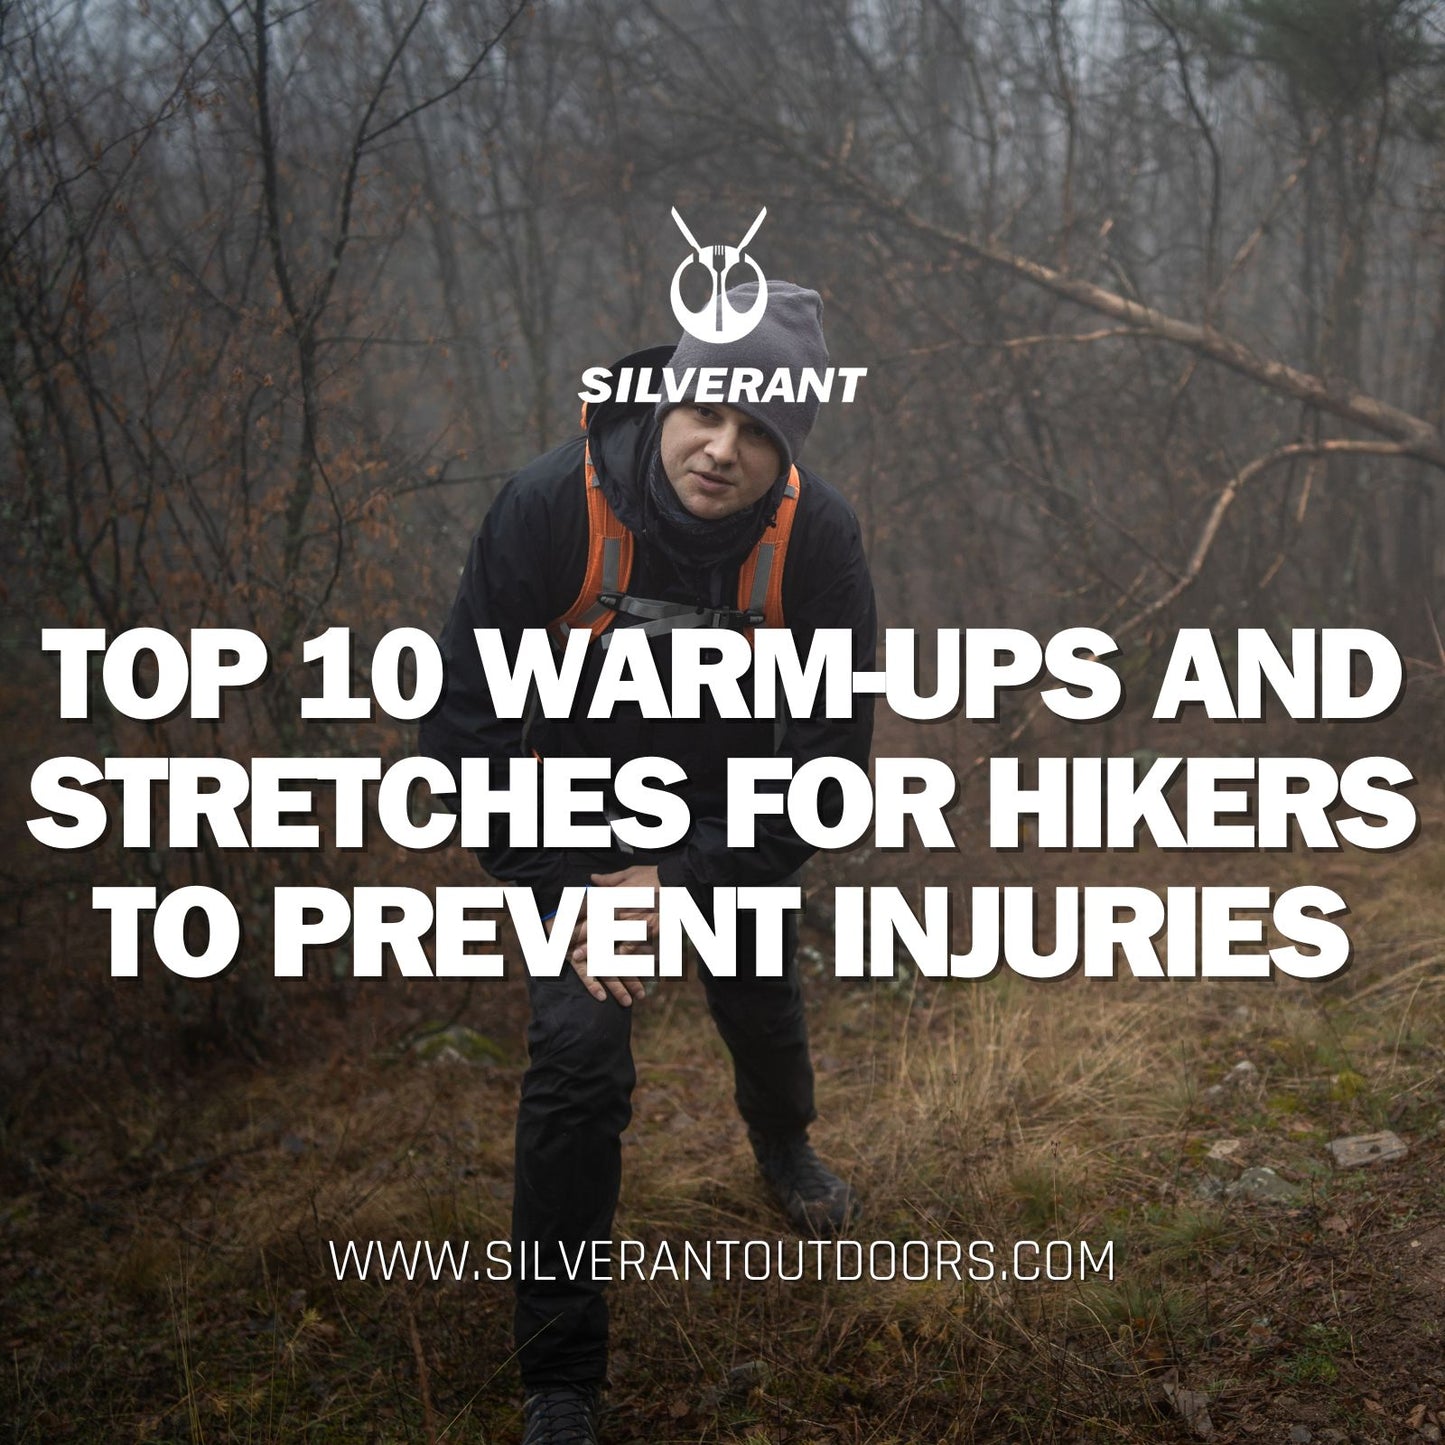 TOP 10 Warm-ups and Stretches for Hikers to Prevent Injuries